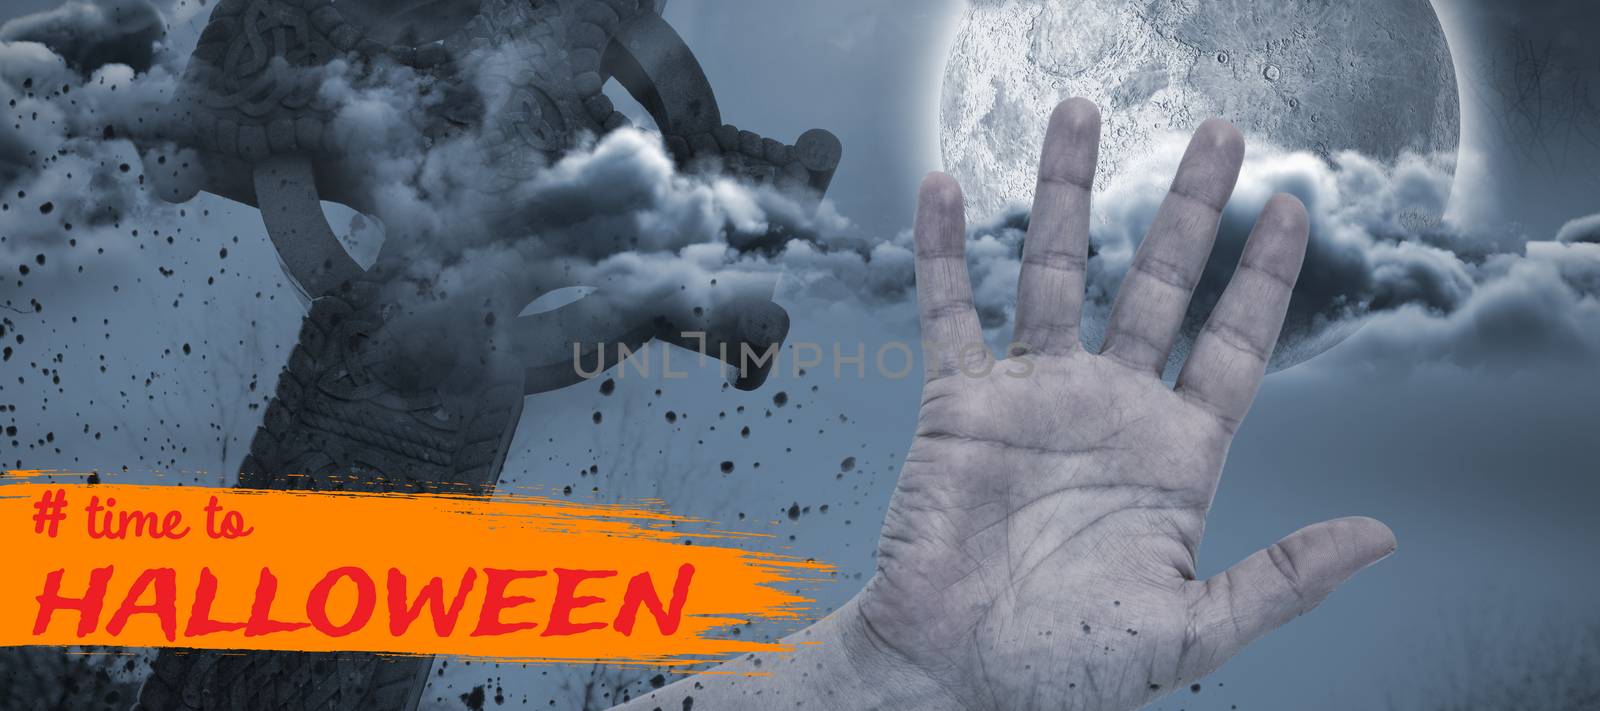 Graphic image of time to Halloween text against hand by side of celtic cross in front of moon